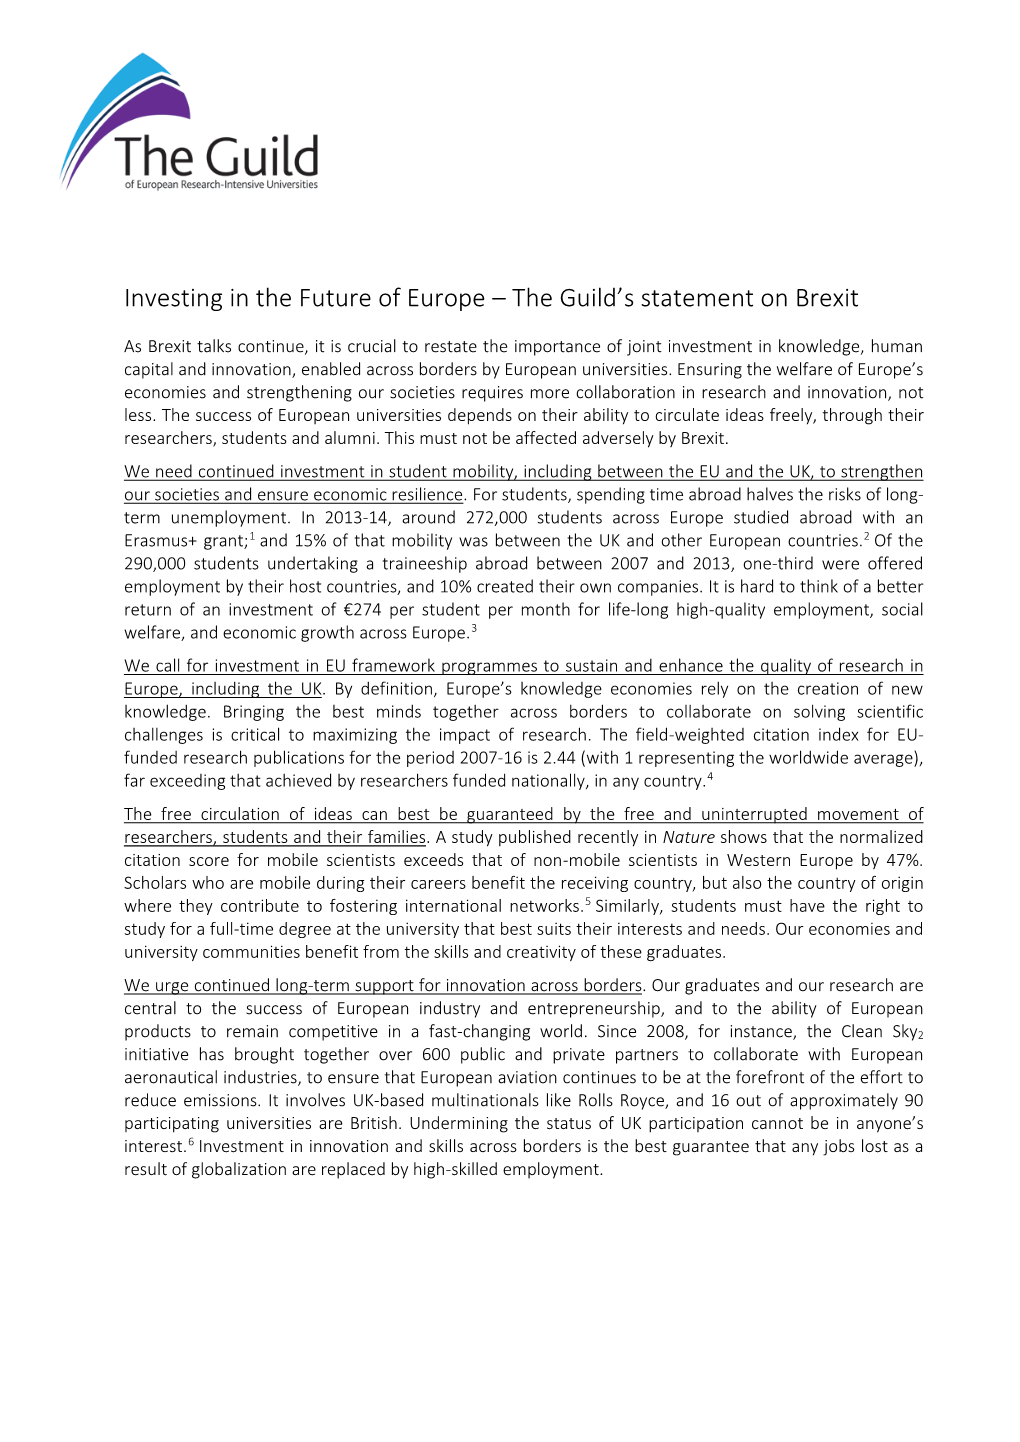 Investing in the Future of Europe – the Guild's Statement on Brexit